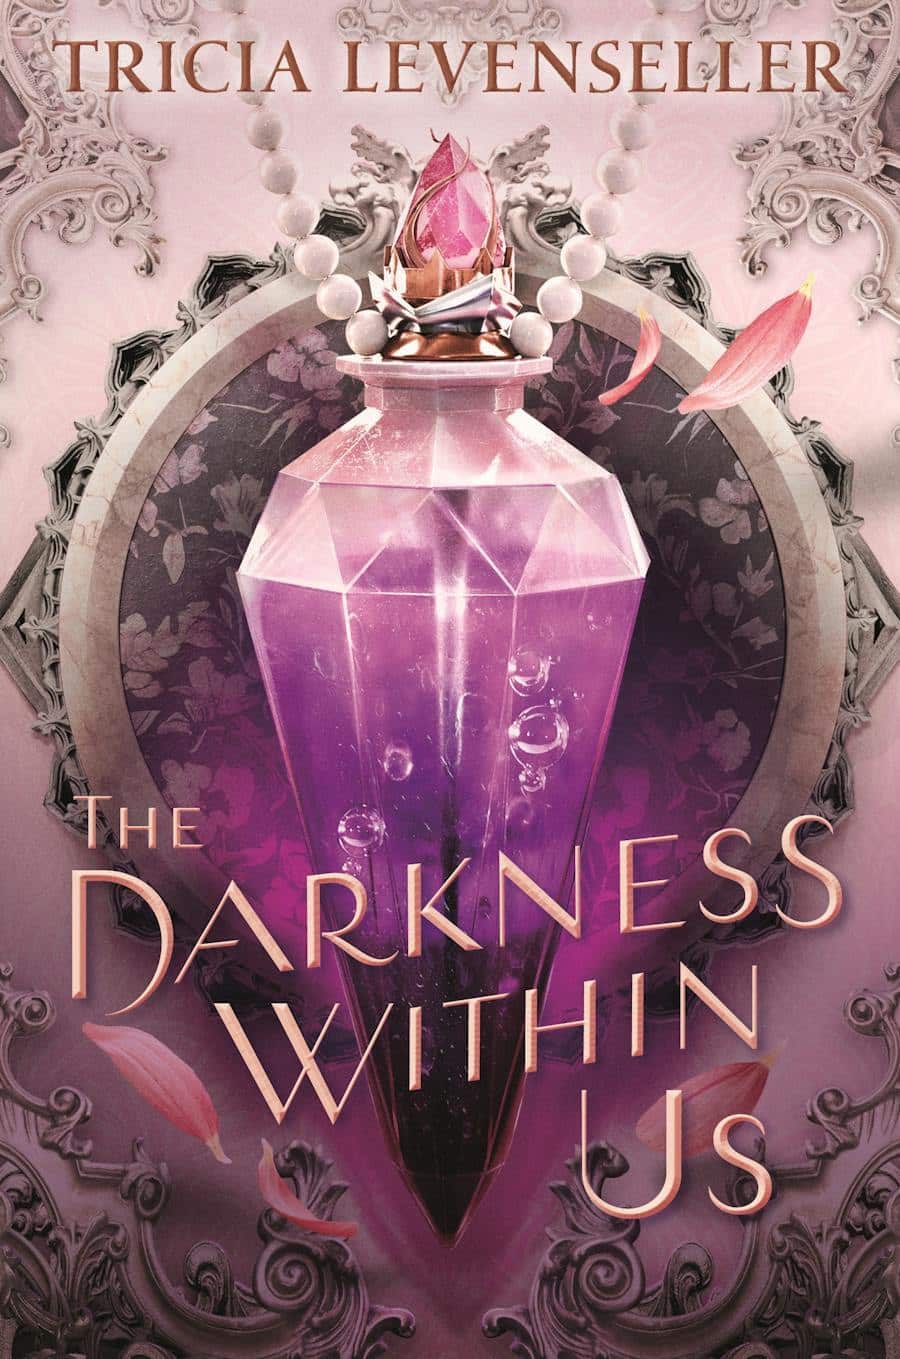 The Darkness Within Us_Tricia Levenseller